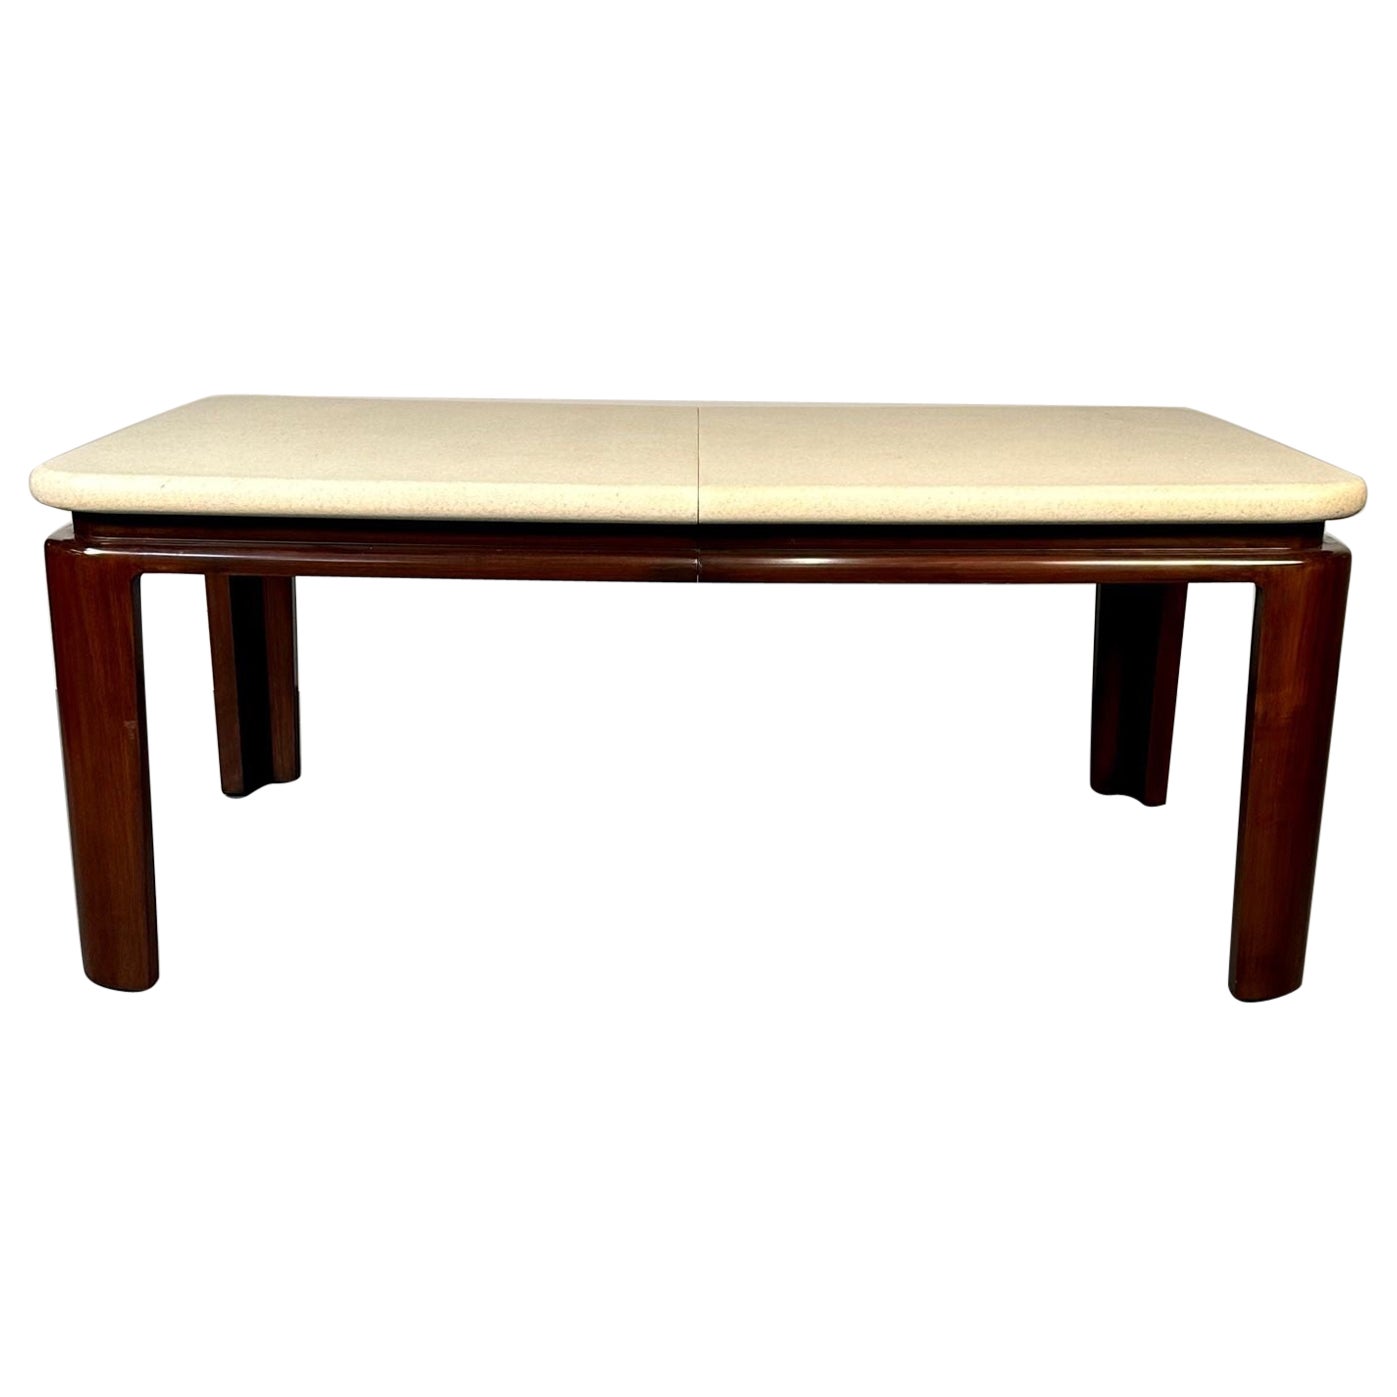 Paul Frankl, Johnson Furniture, Mid-Century Modern Dining Table, Cork, Mahogany For Sale